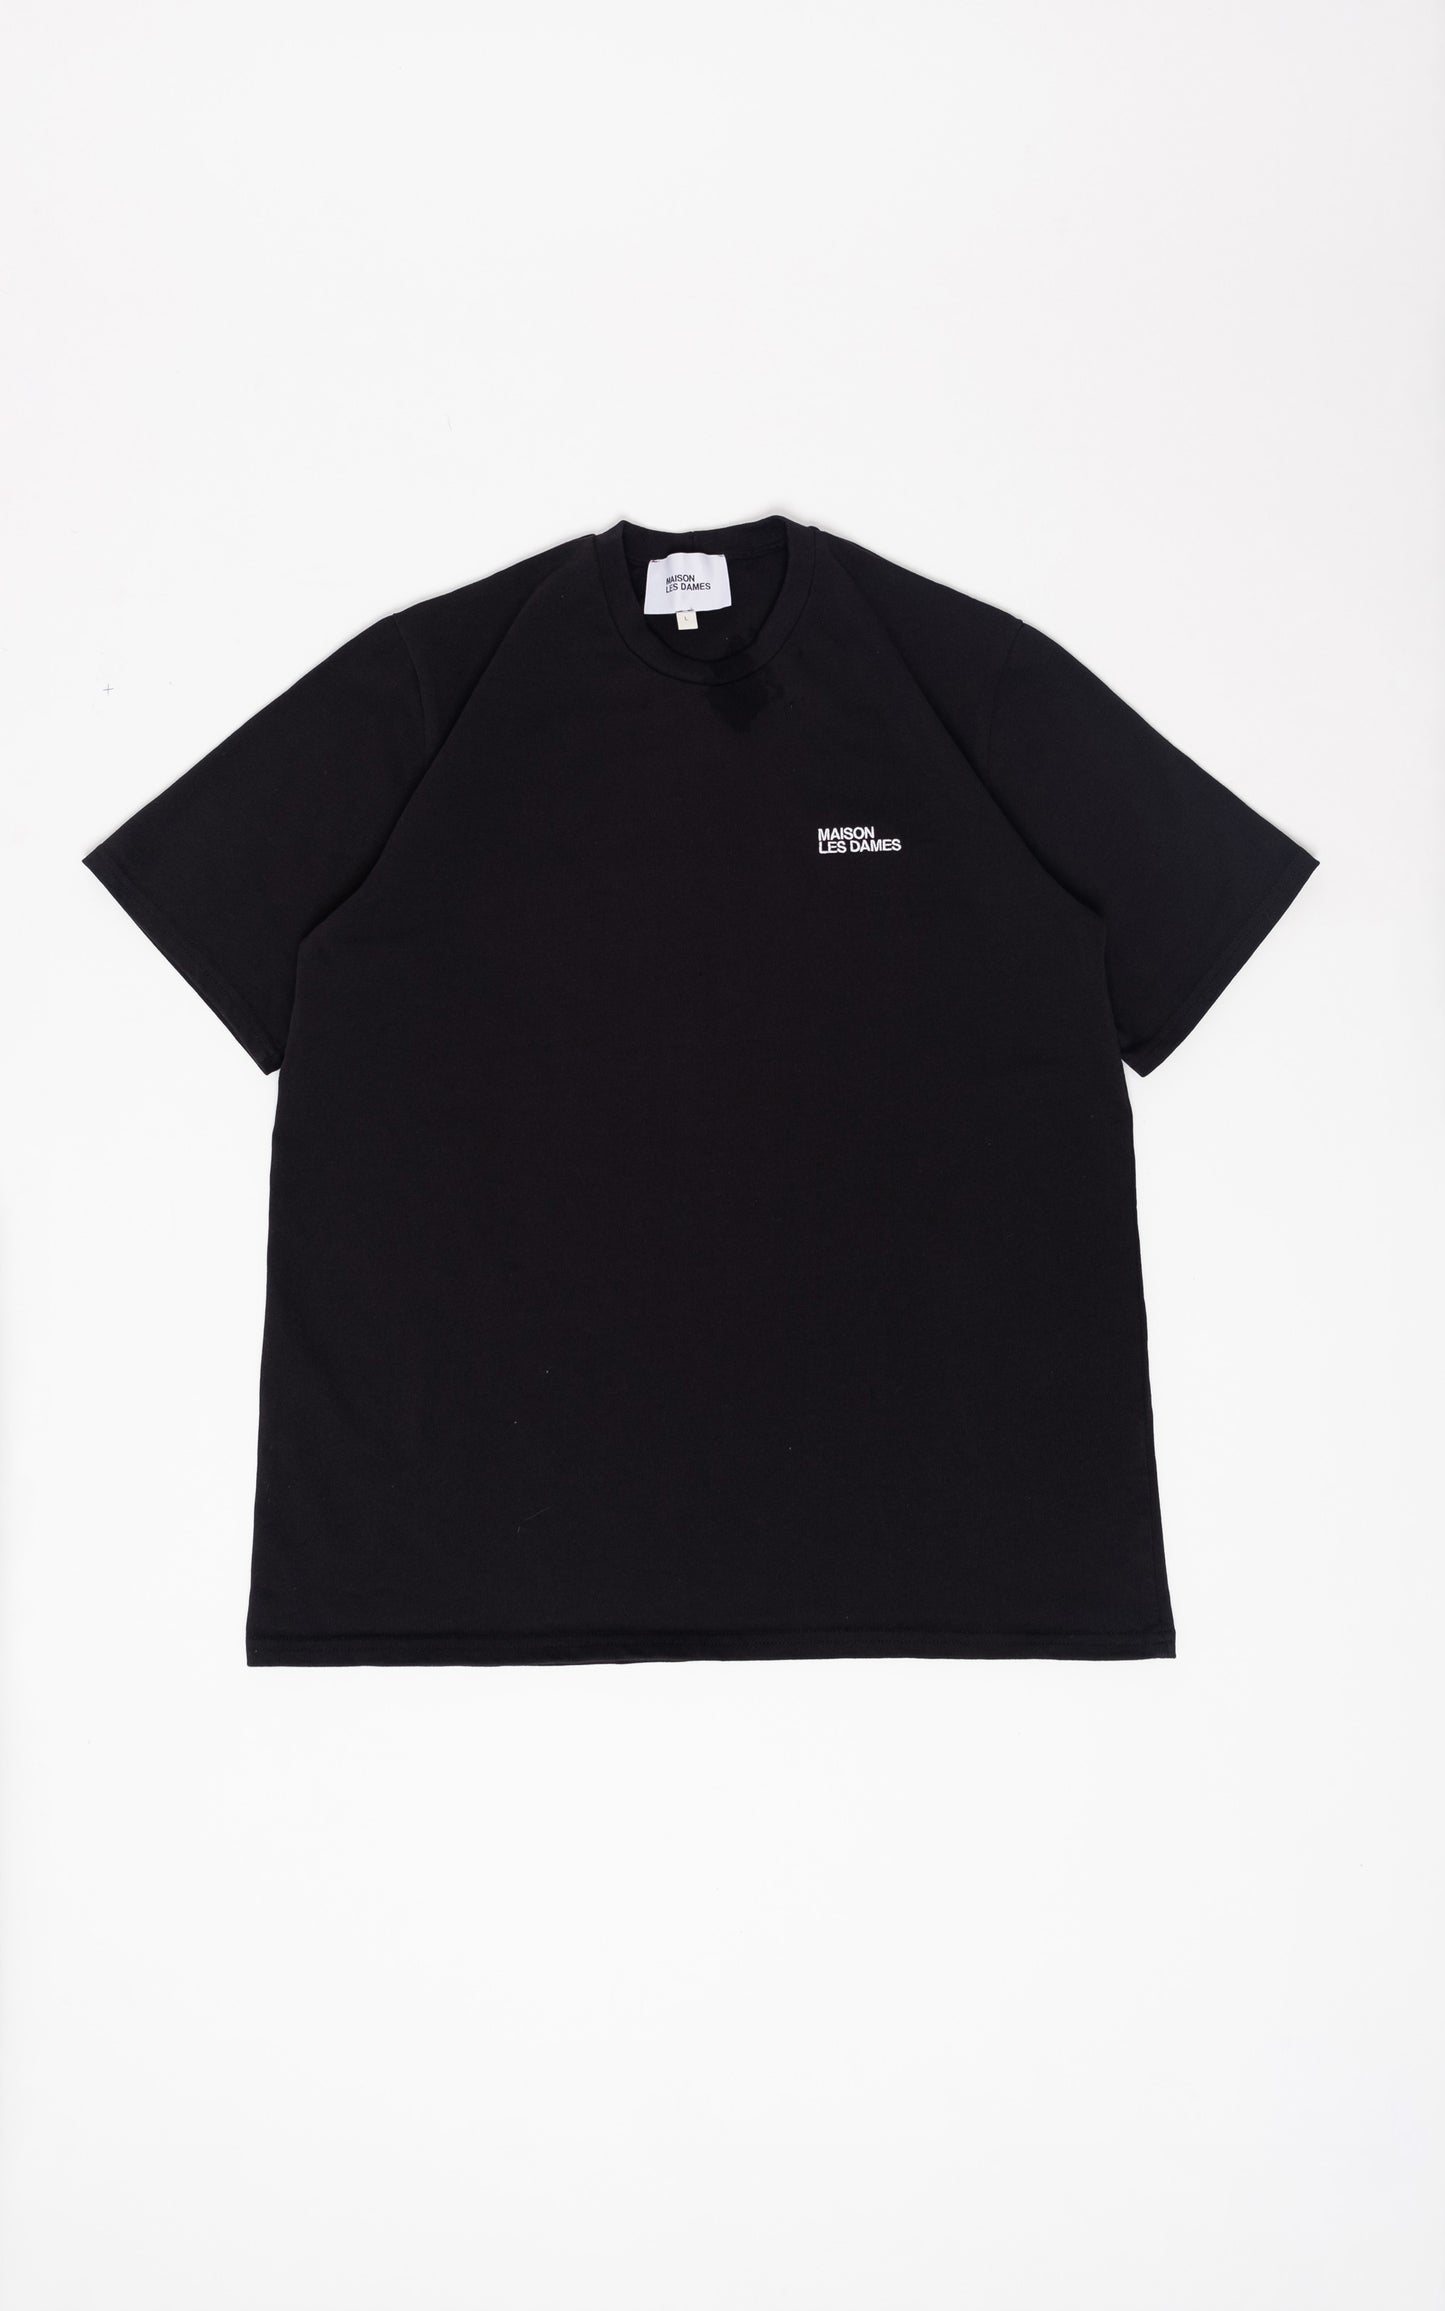 THE BLACK EMBROIDERED T-SHIRT